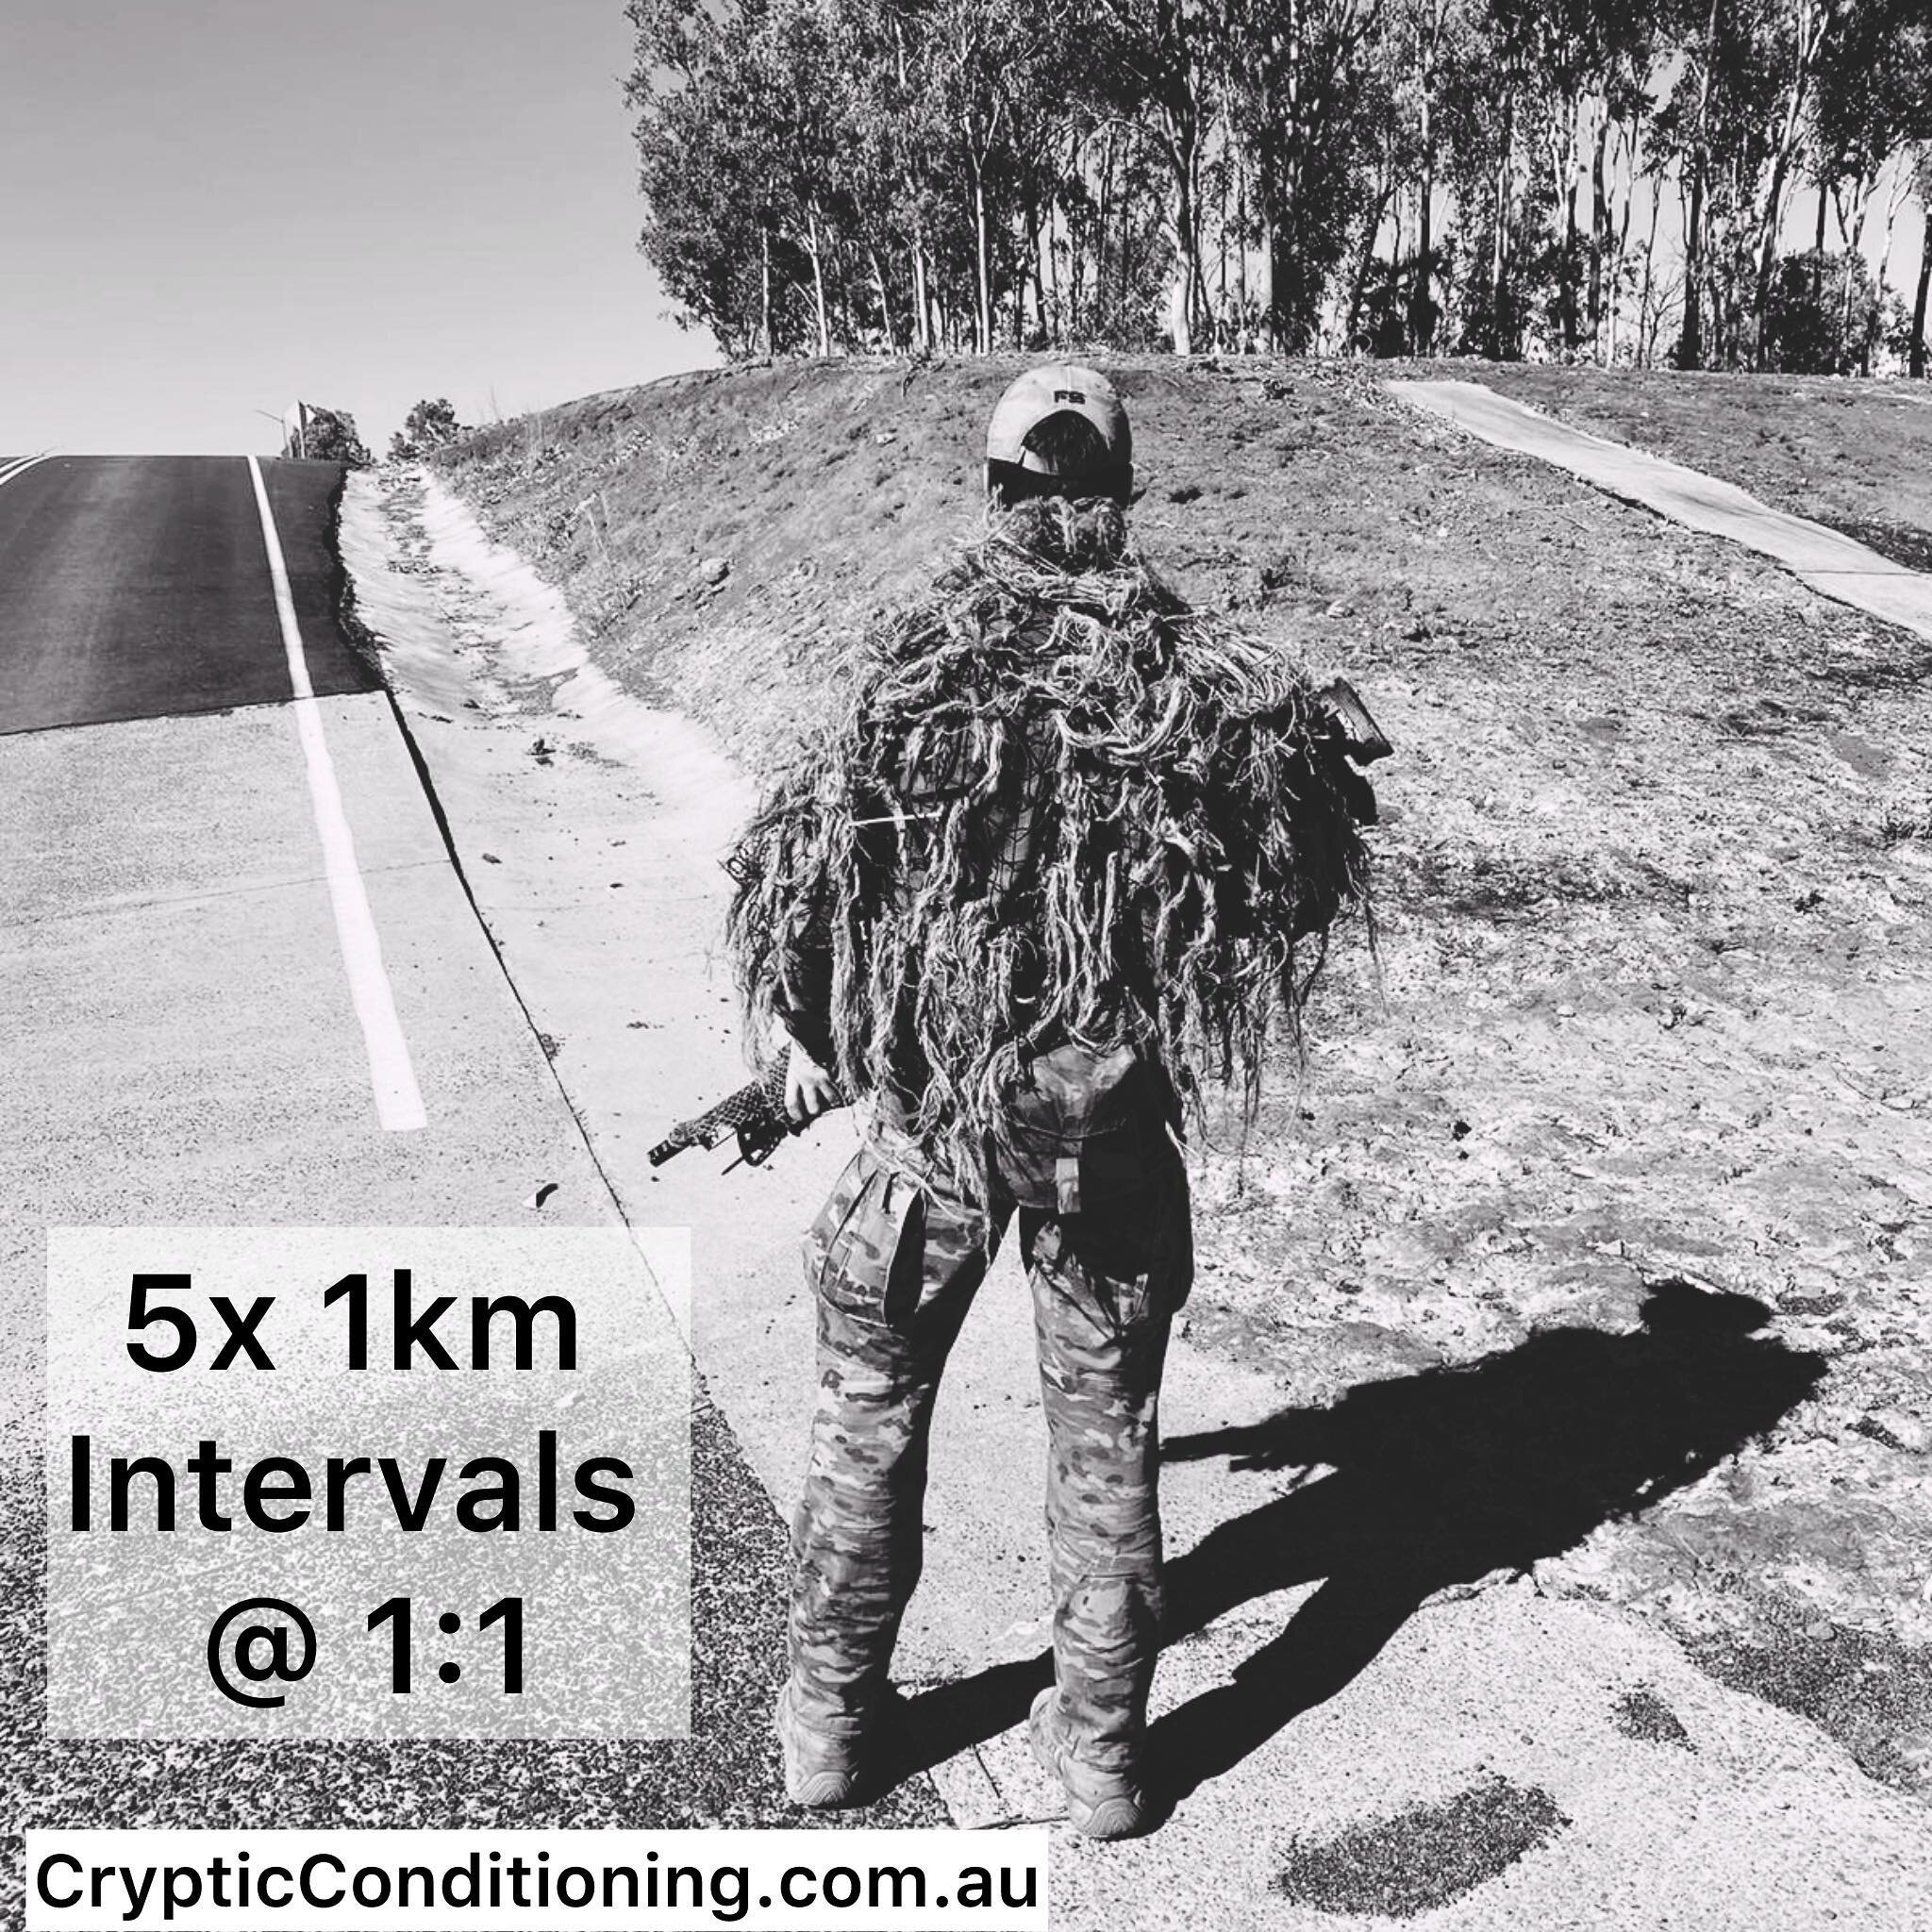 Straight out of our RAR Jack Of All Trades Program 

Find the full 8 Week program at www.crypticconditioning.com.au

Anaerobic Workout: 
5x 1km Intervals @ 1:1 

Brief:
We like to view these sessions as critical. In essence it is the &lsquo;gut&rsquo